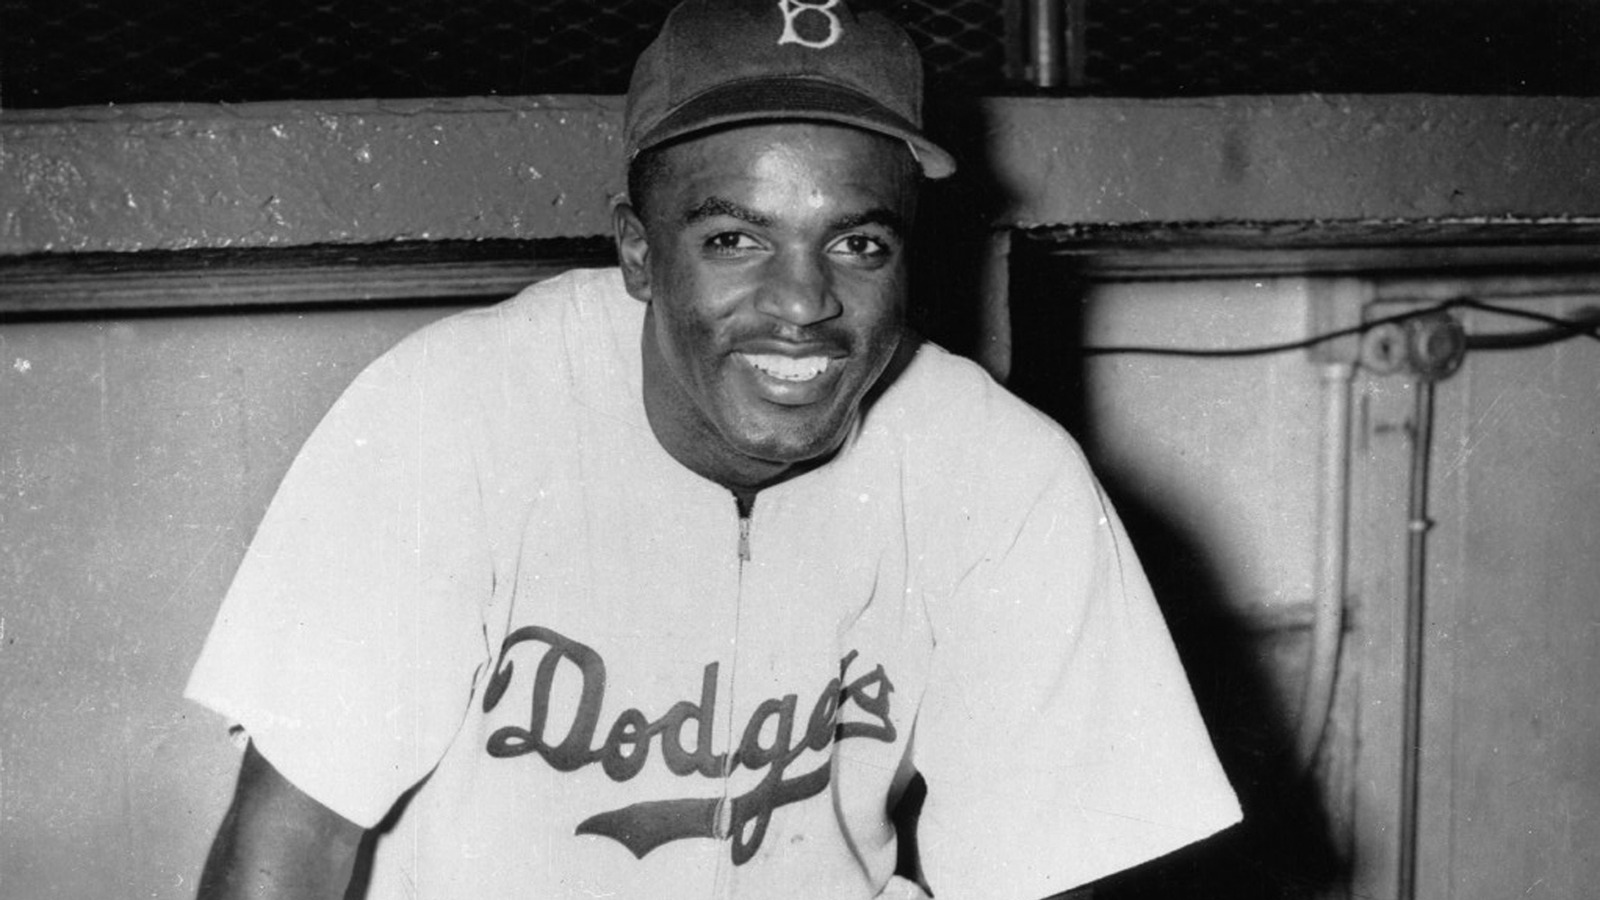 10 Things You Didn't Know About Jackie Robinson - Silver Dolphin Books